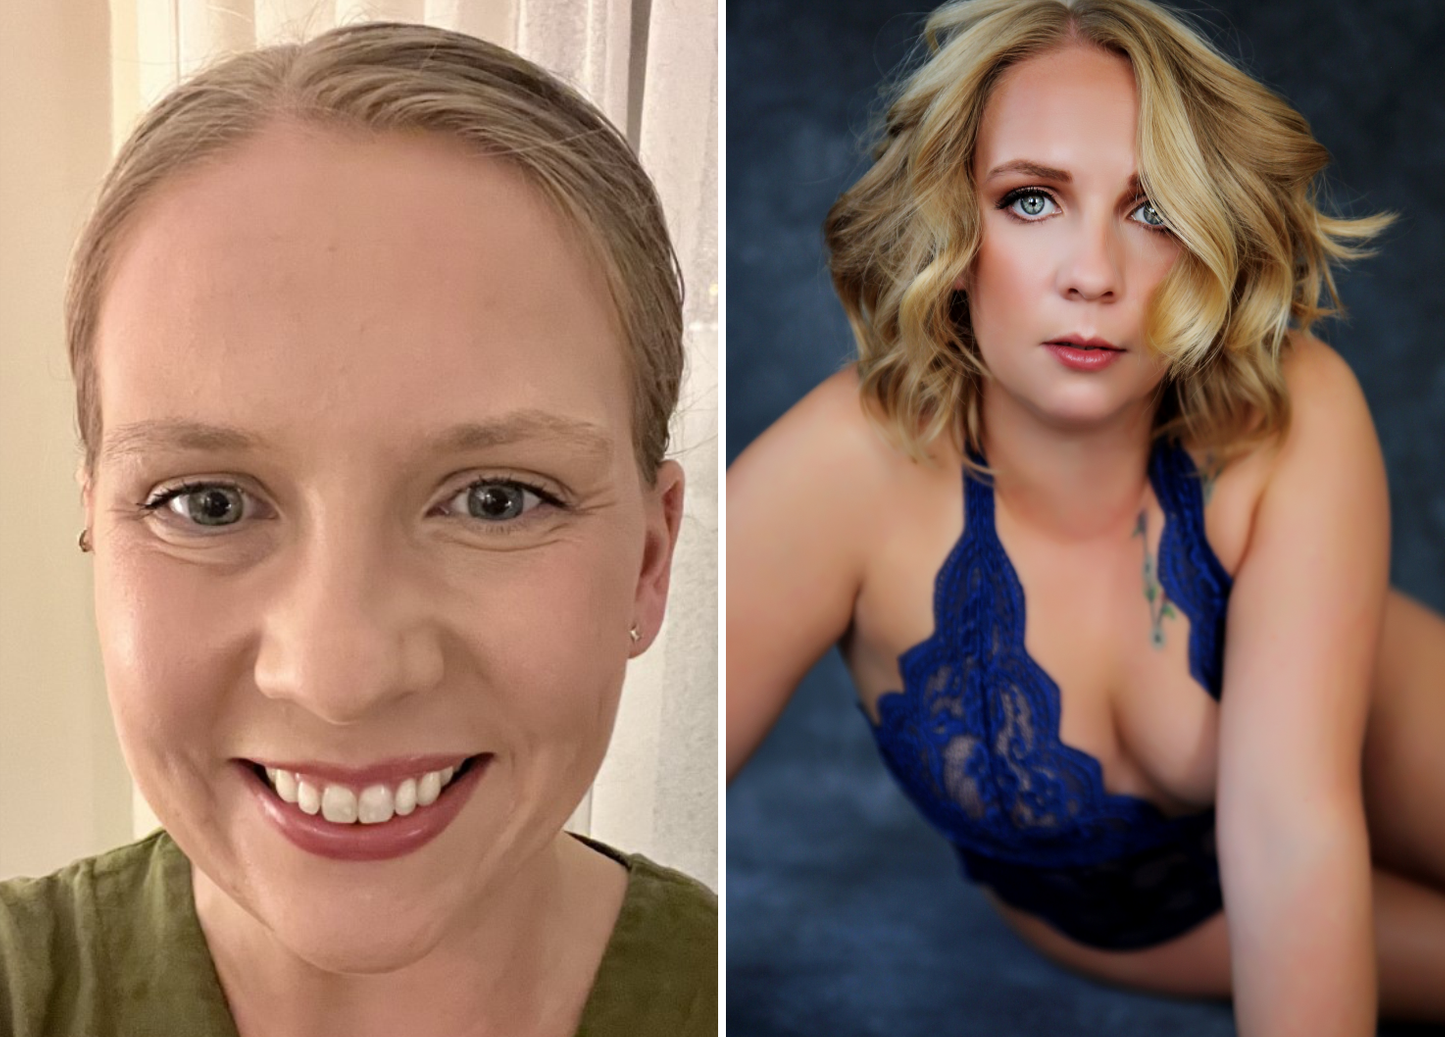 Before and after split image: left side shows a smiling woman with blonde hair pulled back, wearing minimal makeup. The right side features the same woman in a blue lace top, dramatic makeup main street boudoir studio